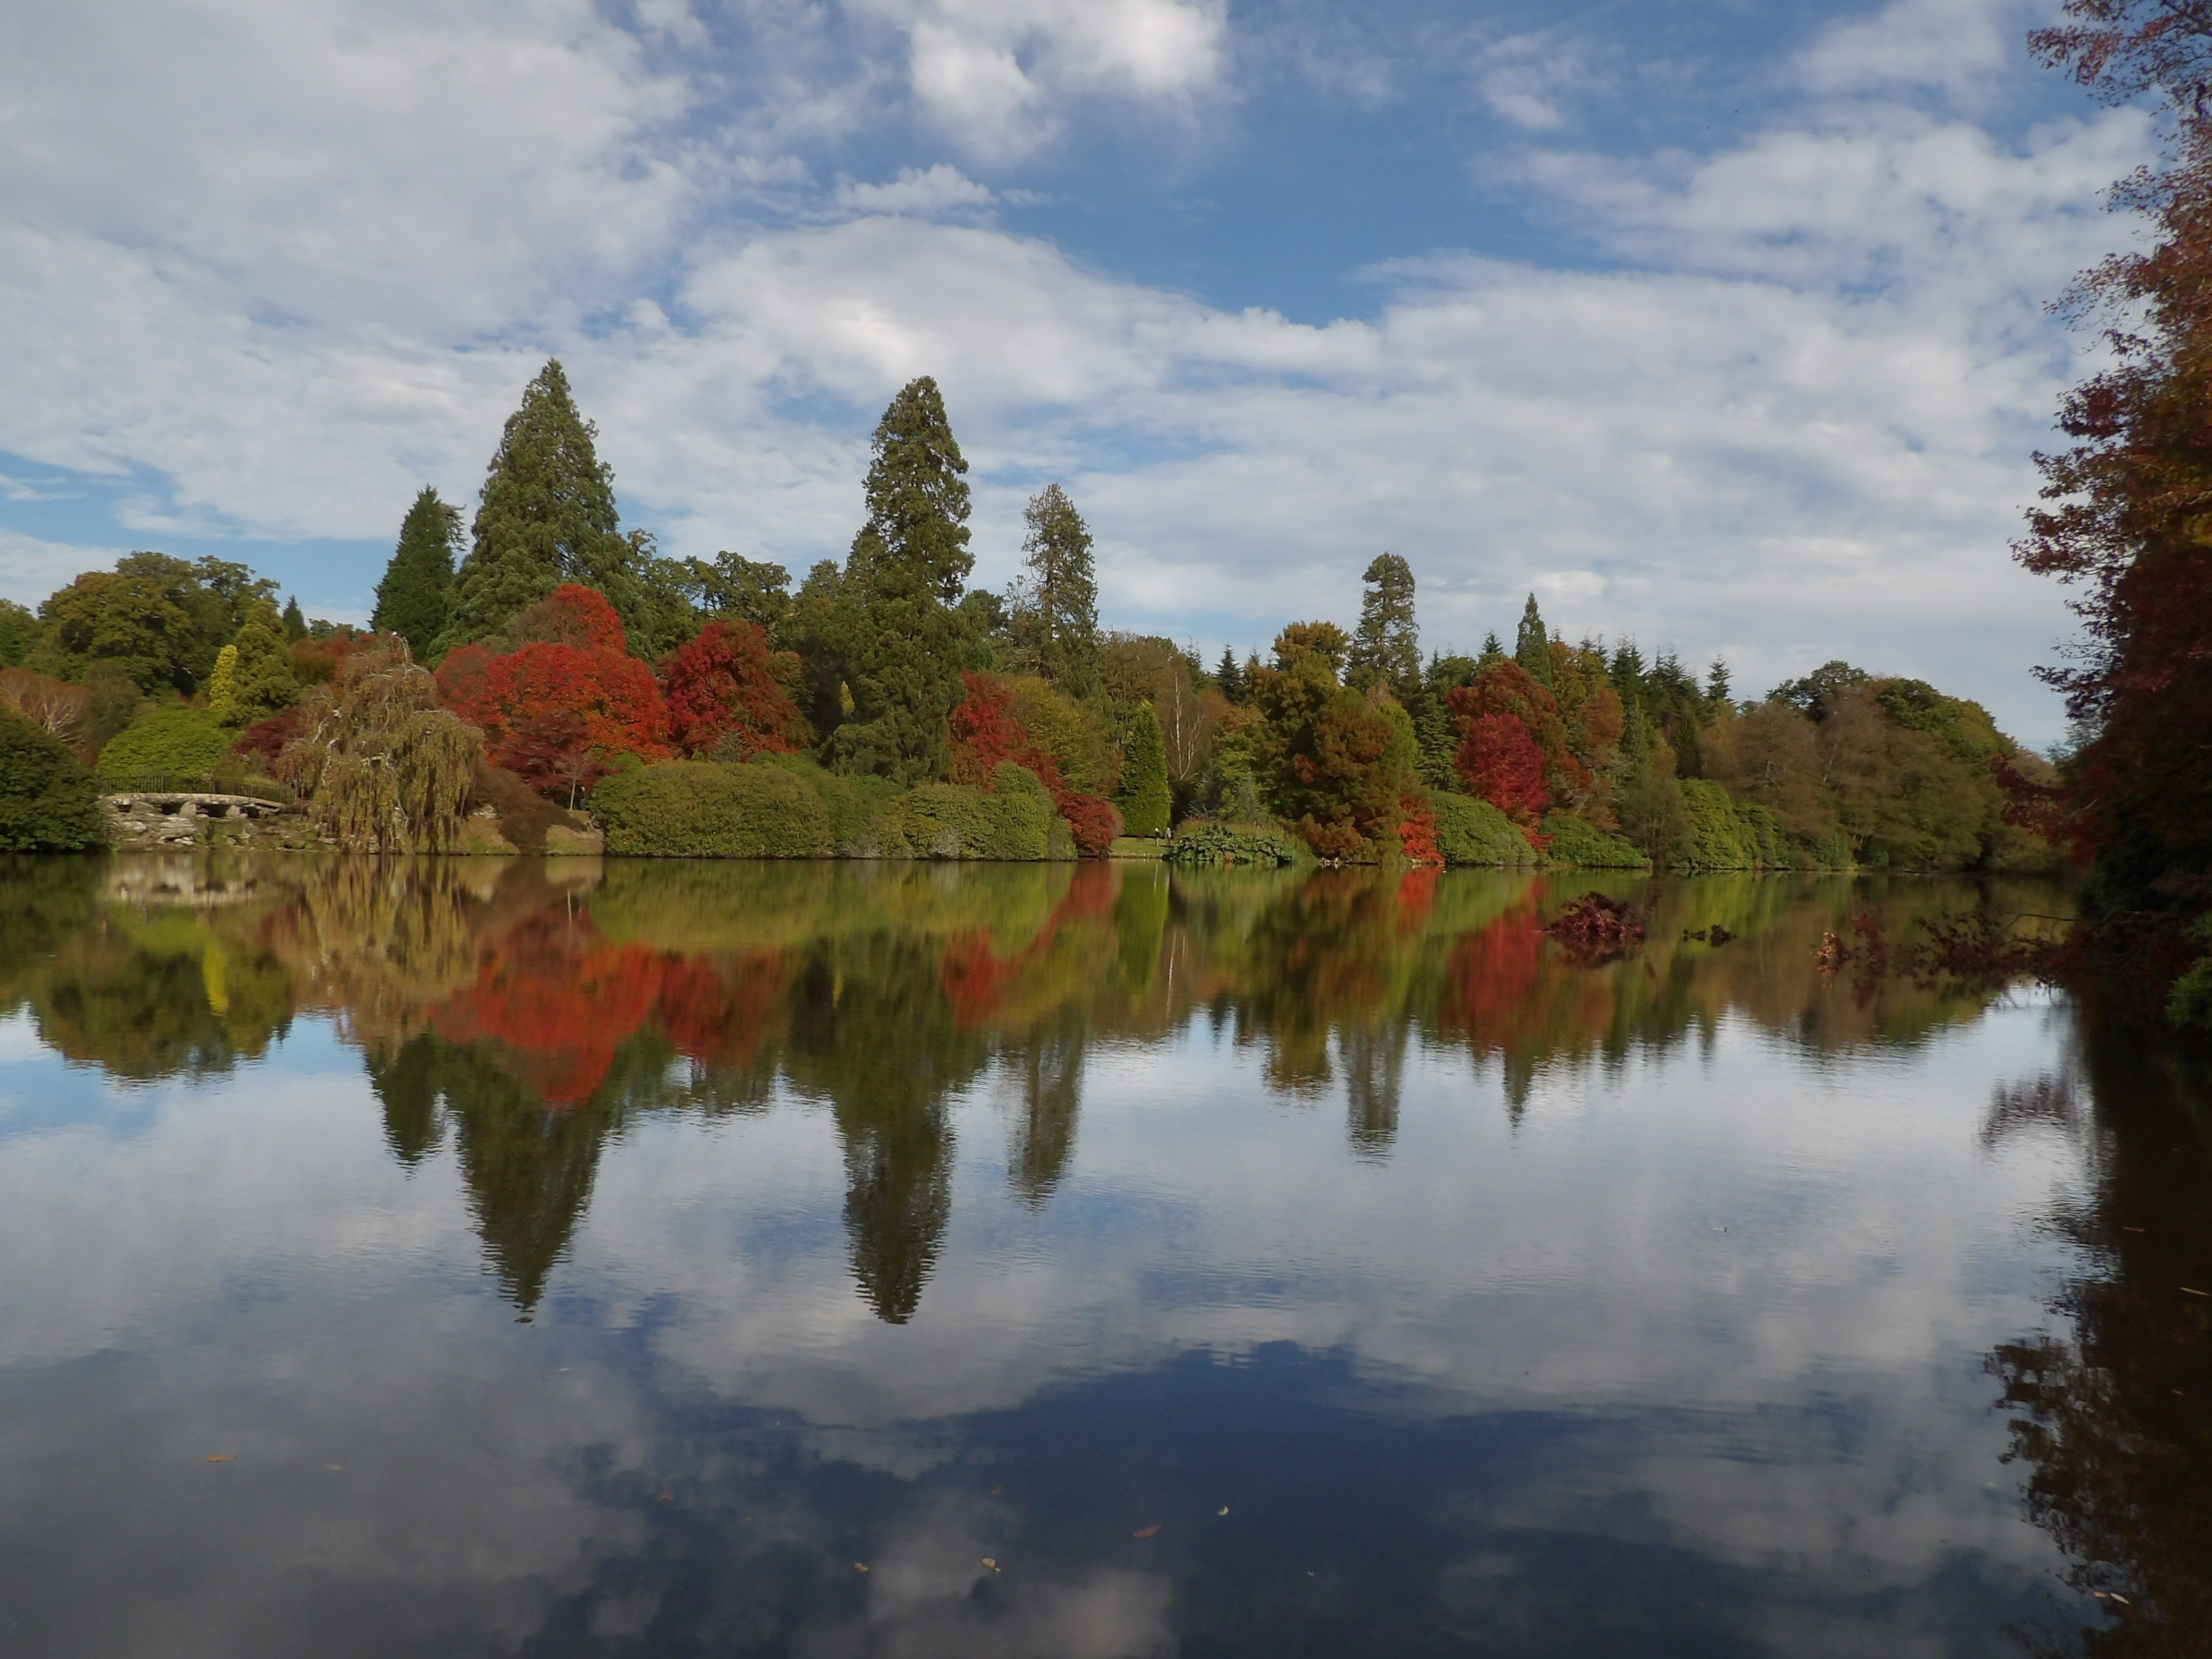 A photo of the lake in Sheffield Park, trees reflecting in the water